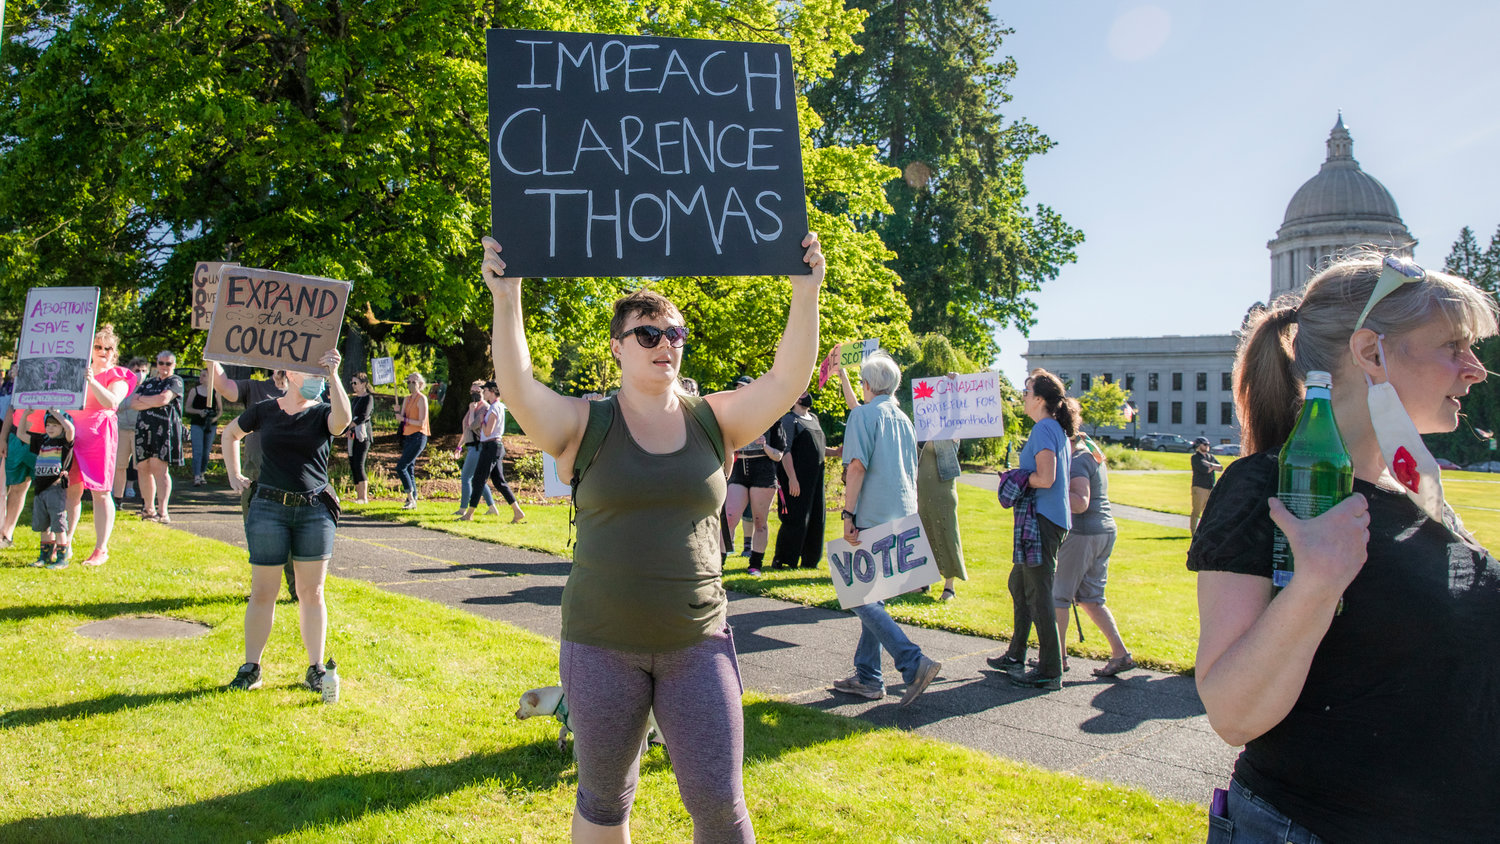 A sign rads "Impeach Clarence Thomas” during a protest in Olympia on Friday.